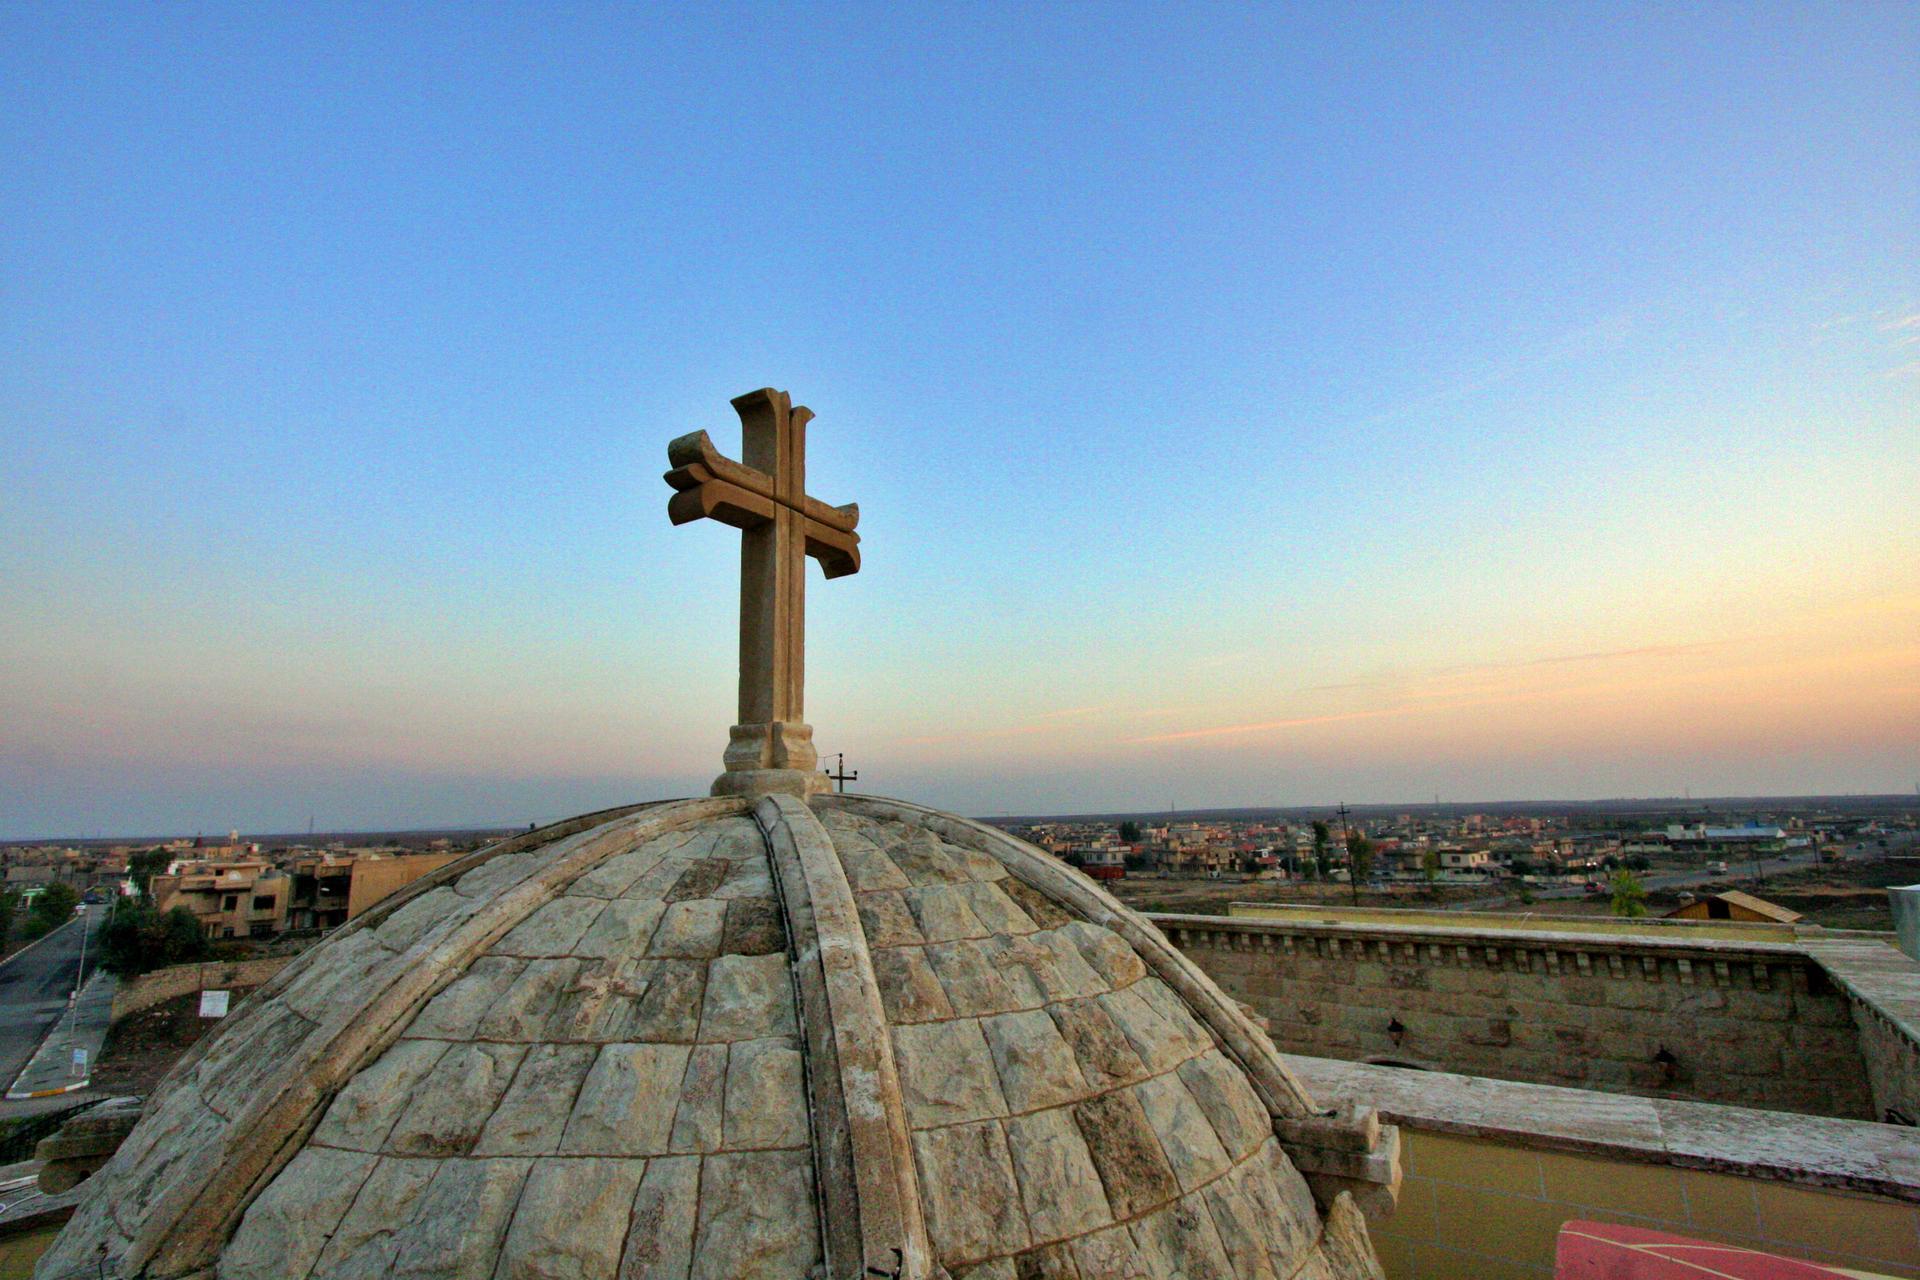 IRAQ-MOSUL_S TWO GOVERNORS-PICTURED-The view of Assyrian town Karemlesh, located 23km south east of Mosul, Iraq, from the roof of St Barbara Church-Charlie Faulkner. Charlie Faulkner for The National